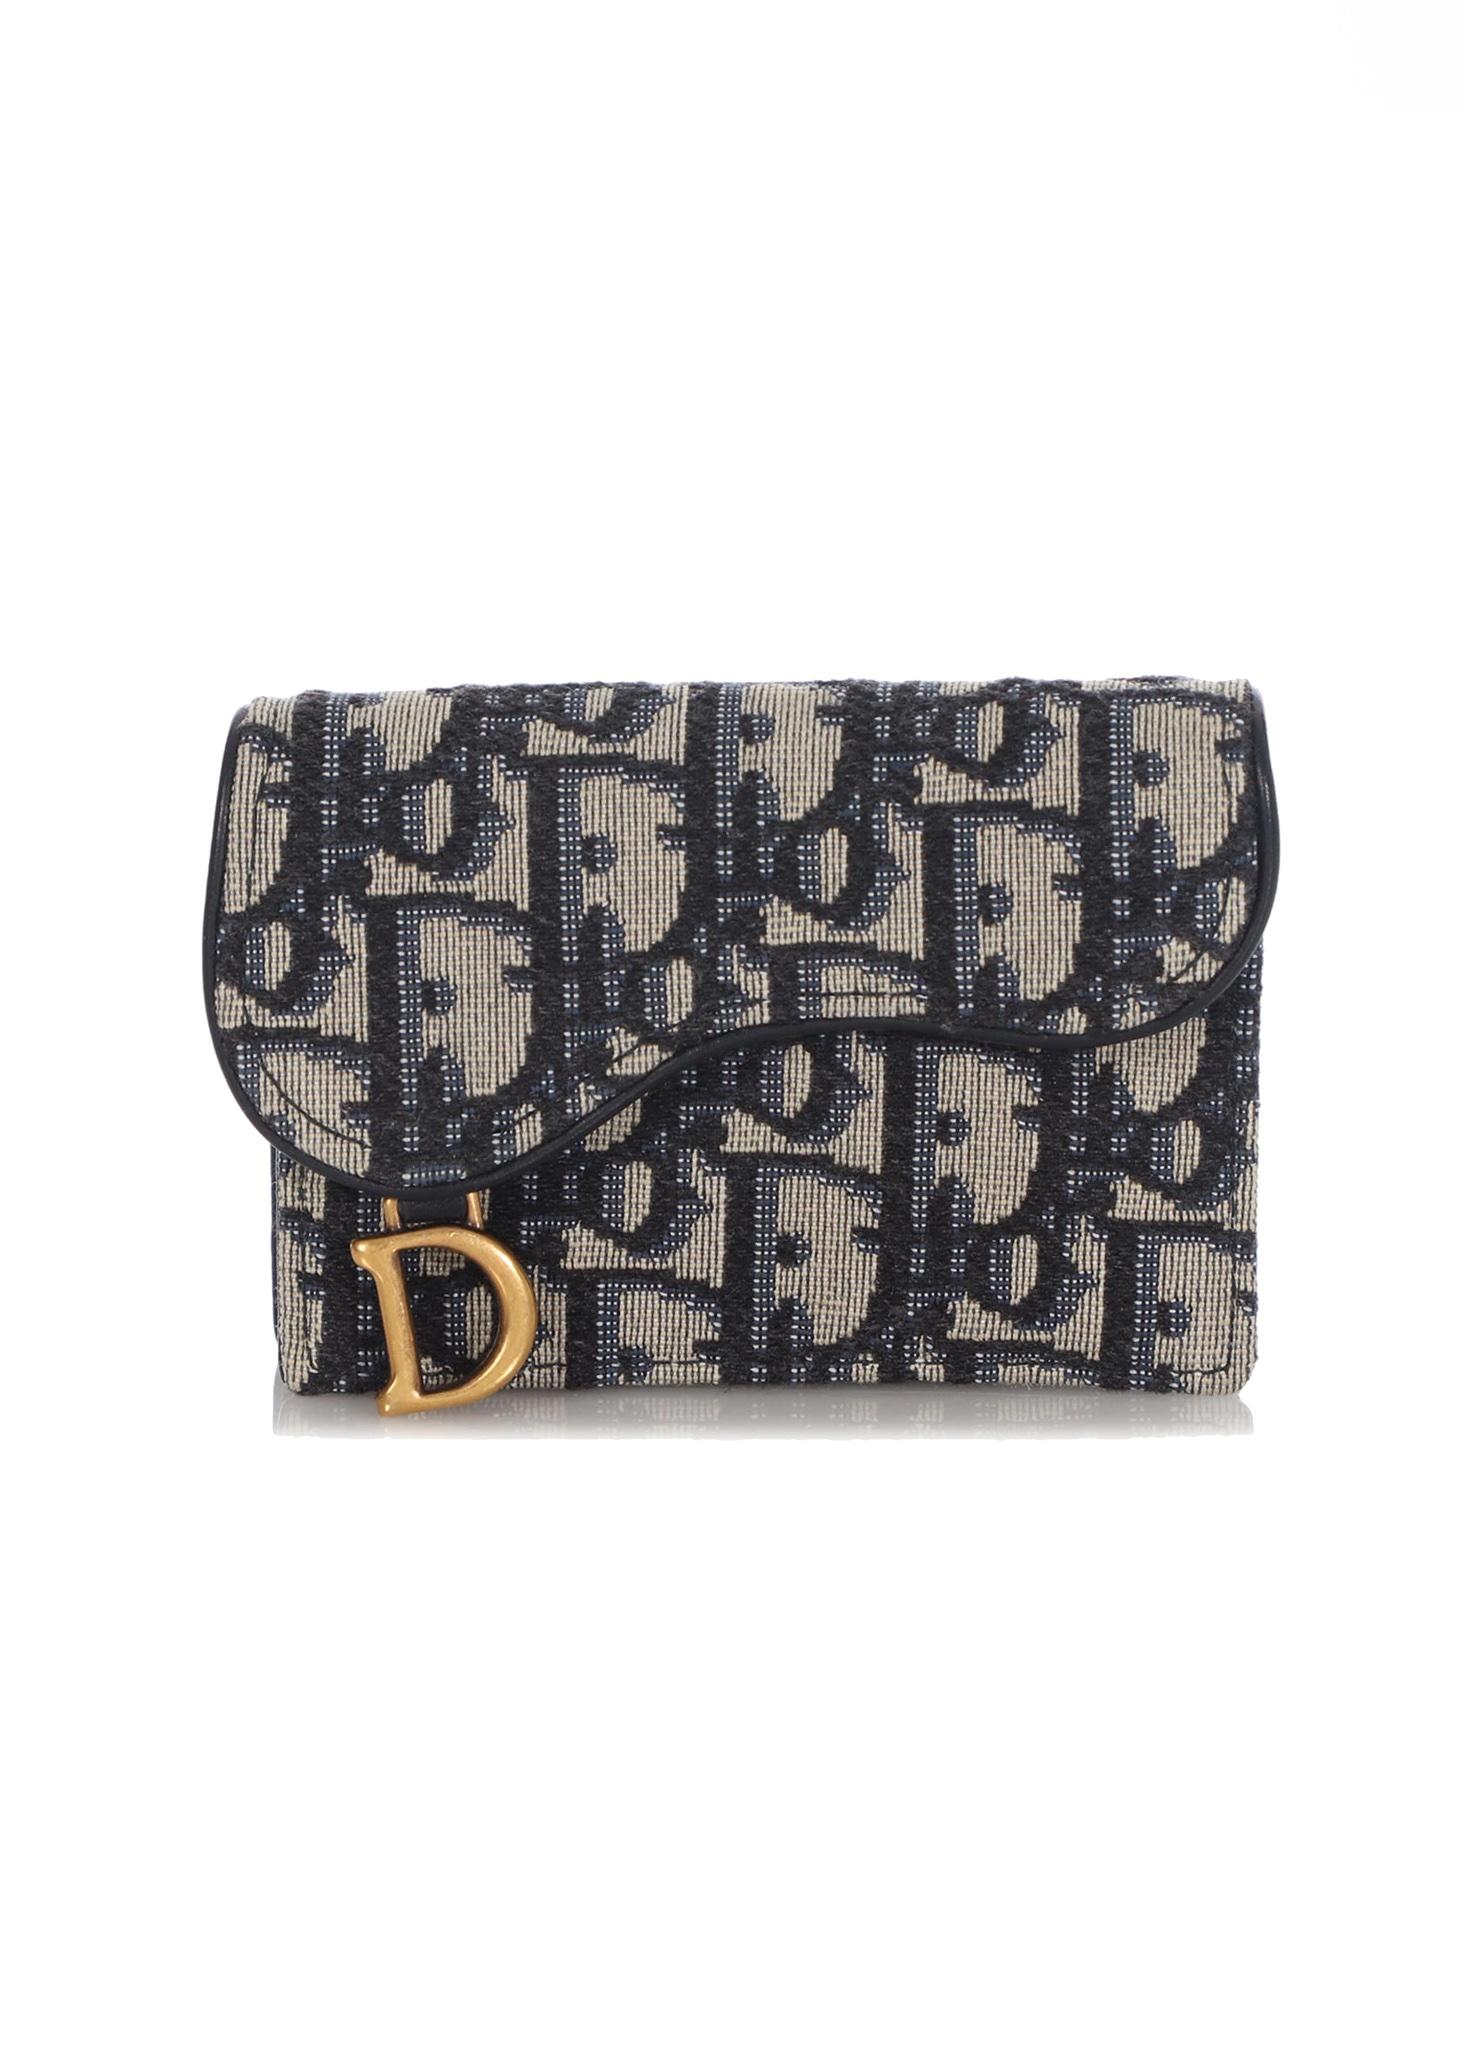 The Saddle flap card holder offers a practical and compact alternative to the traditional Saddle wallet. Its artisanal design, crafted in blue Dior Oblique jacquard, assures durability and presents a spacious main compartment, two patch pockets and